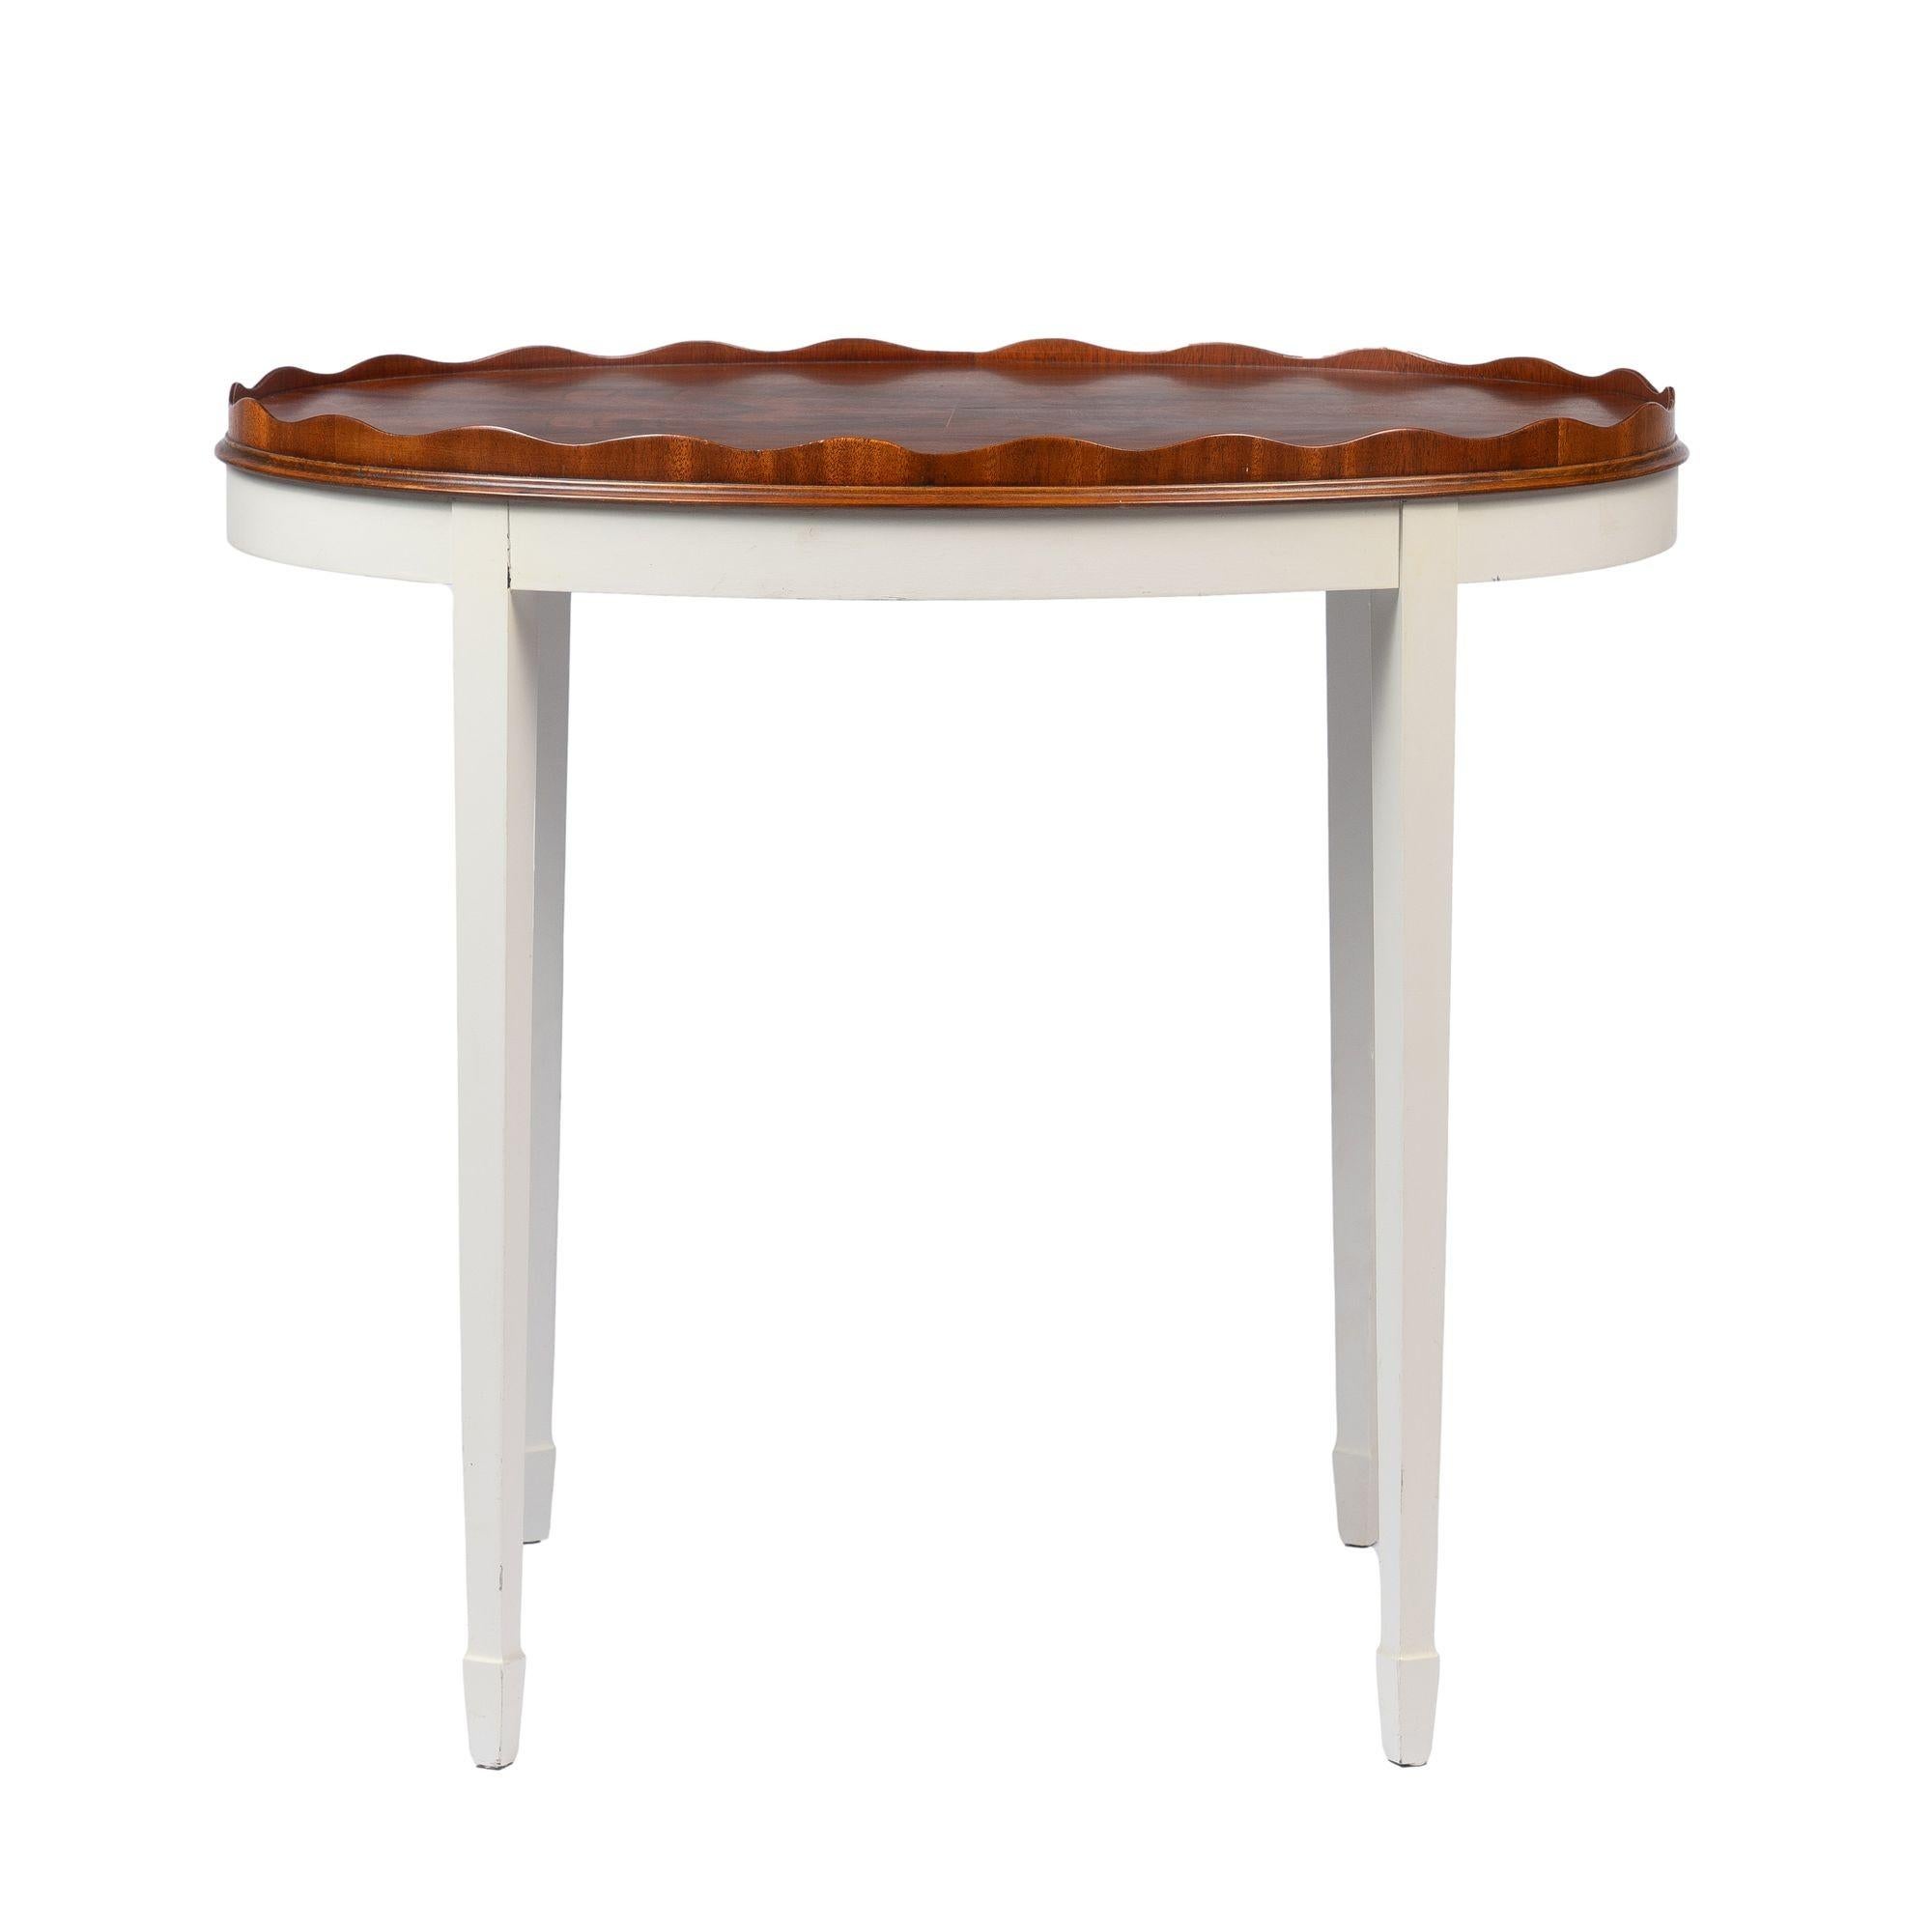 Vintage figured mahogany oval tray with standing scolloped rim mounted on a painted conforming apron with four square tapered legs terminating in spade feet.